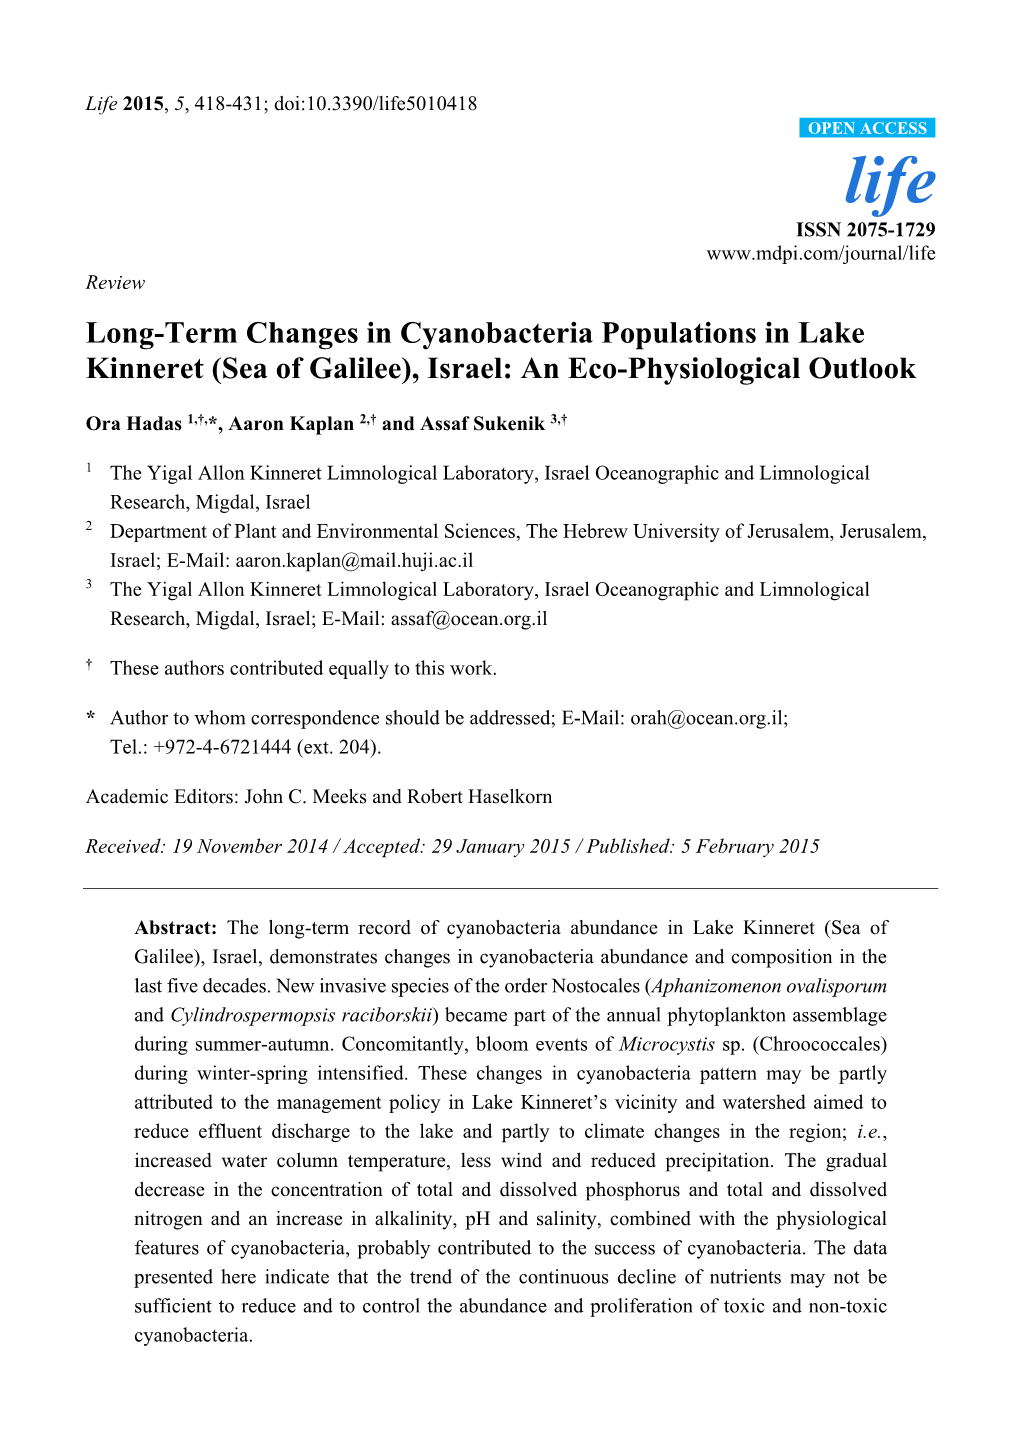 Long-Term Changes in Cyanobacteria Populations in Lake Kinneret (Sea of Galilee), Israel: an Eco-Physiological Outlook